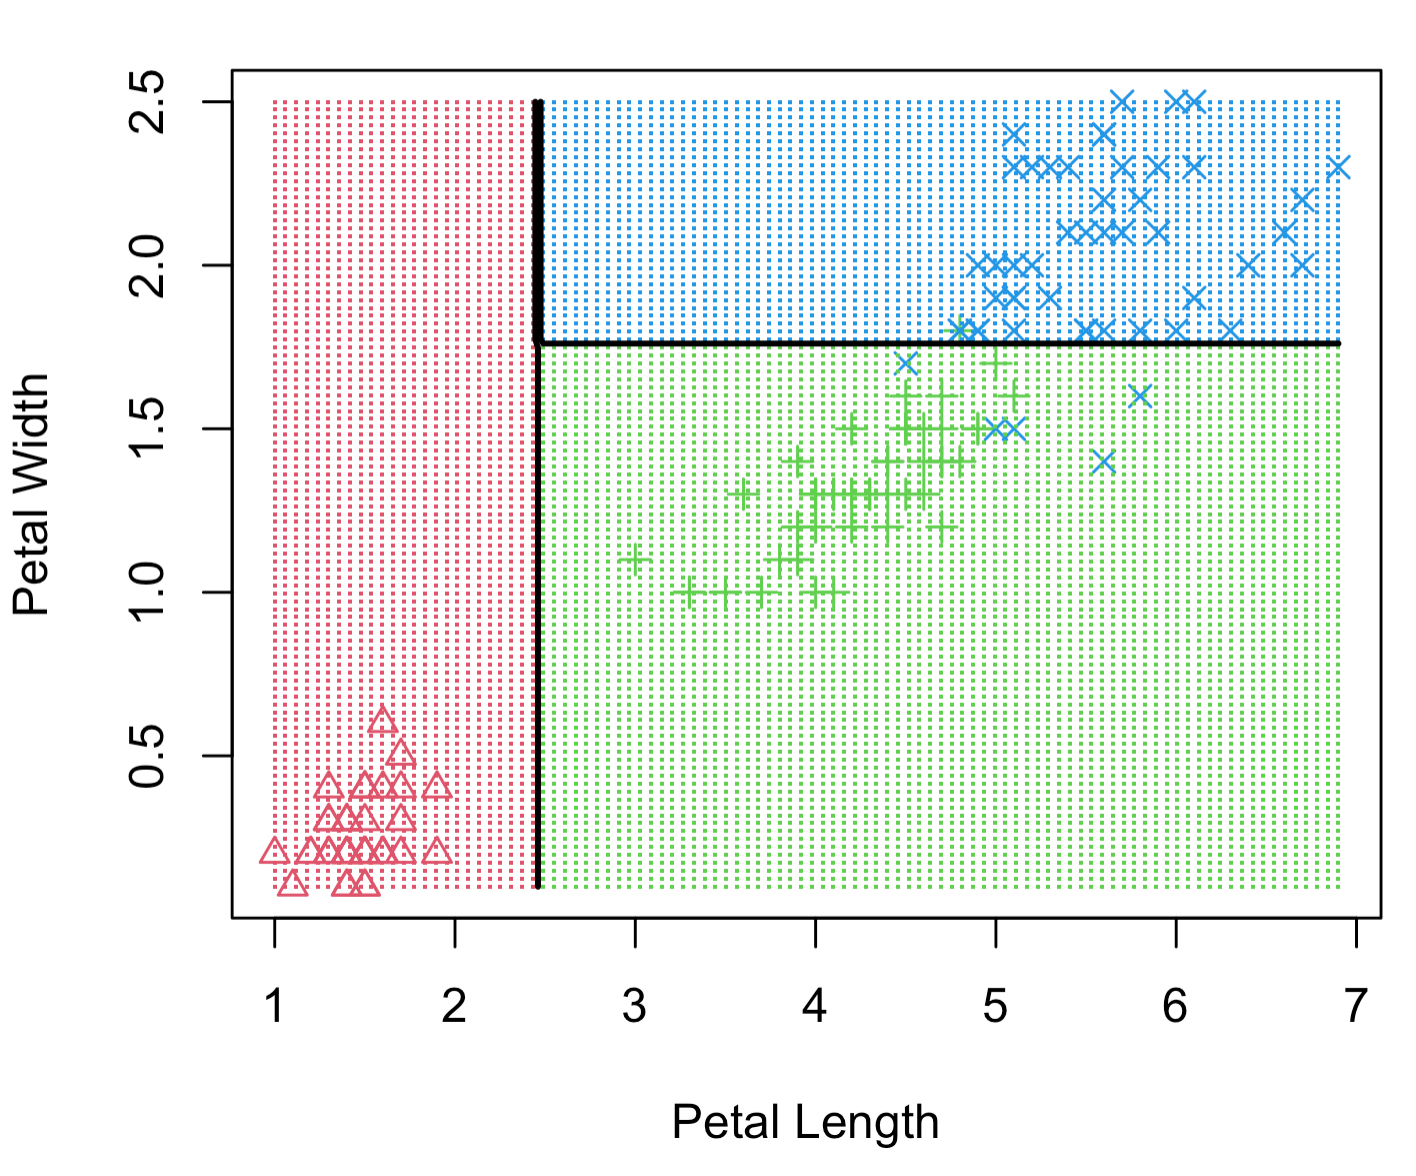 Example of decision regions for different types of flowers based on petal length and width. Three different types of flowers are classified using decisions about length and width.